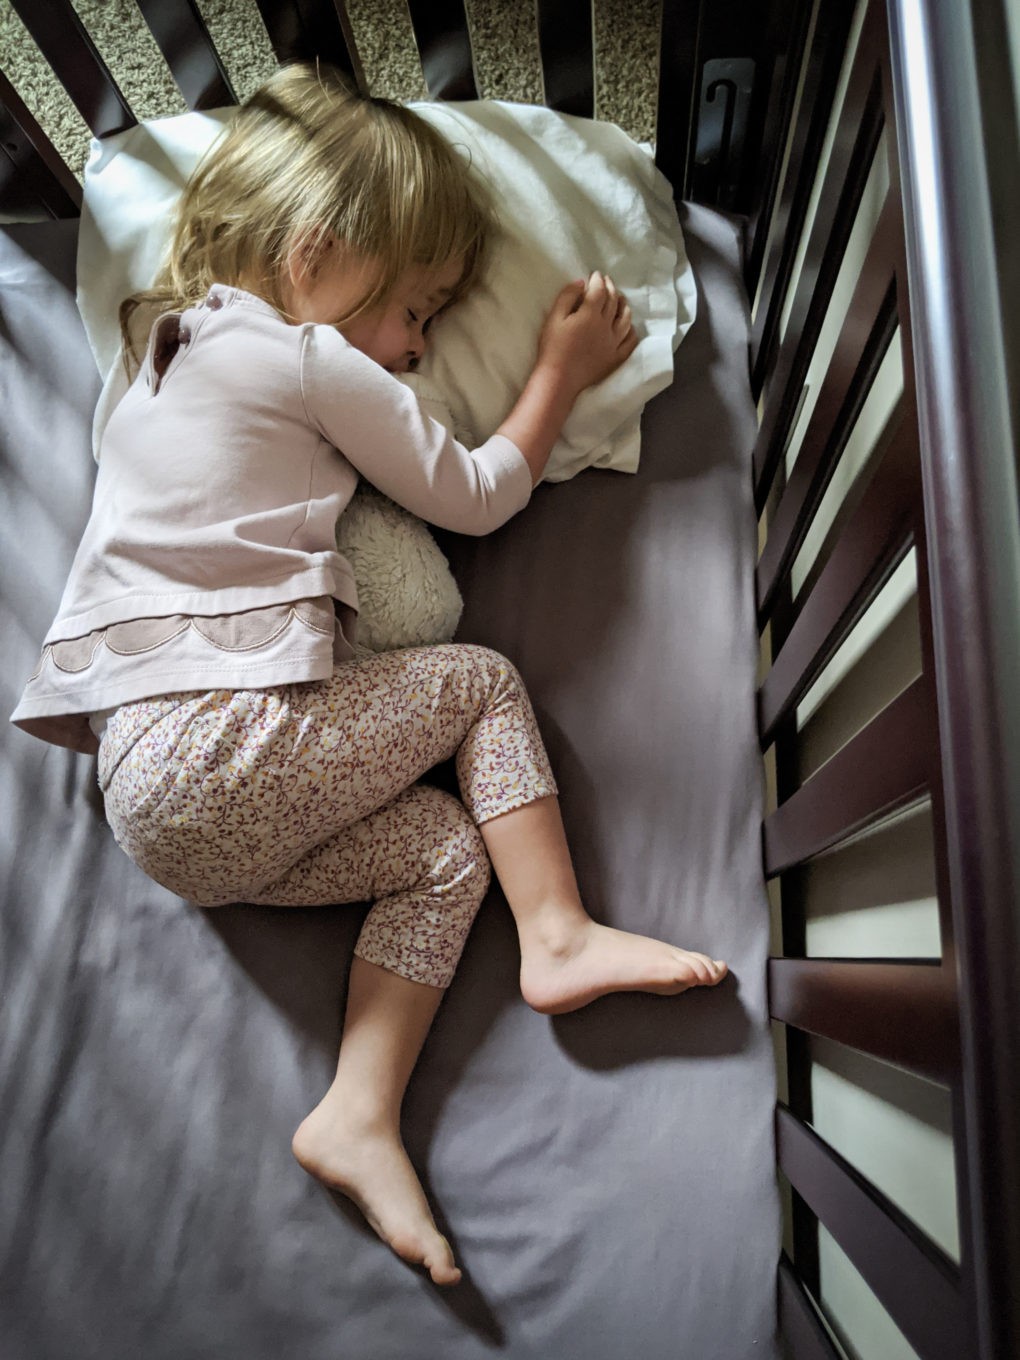 Tips and ways for how to help kids sleep in longer, go to bed faster, and overall help kids sleep better. Easy nap and bedtime tricks for your baby and kid.